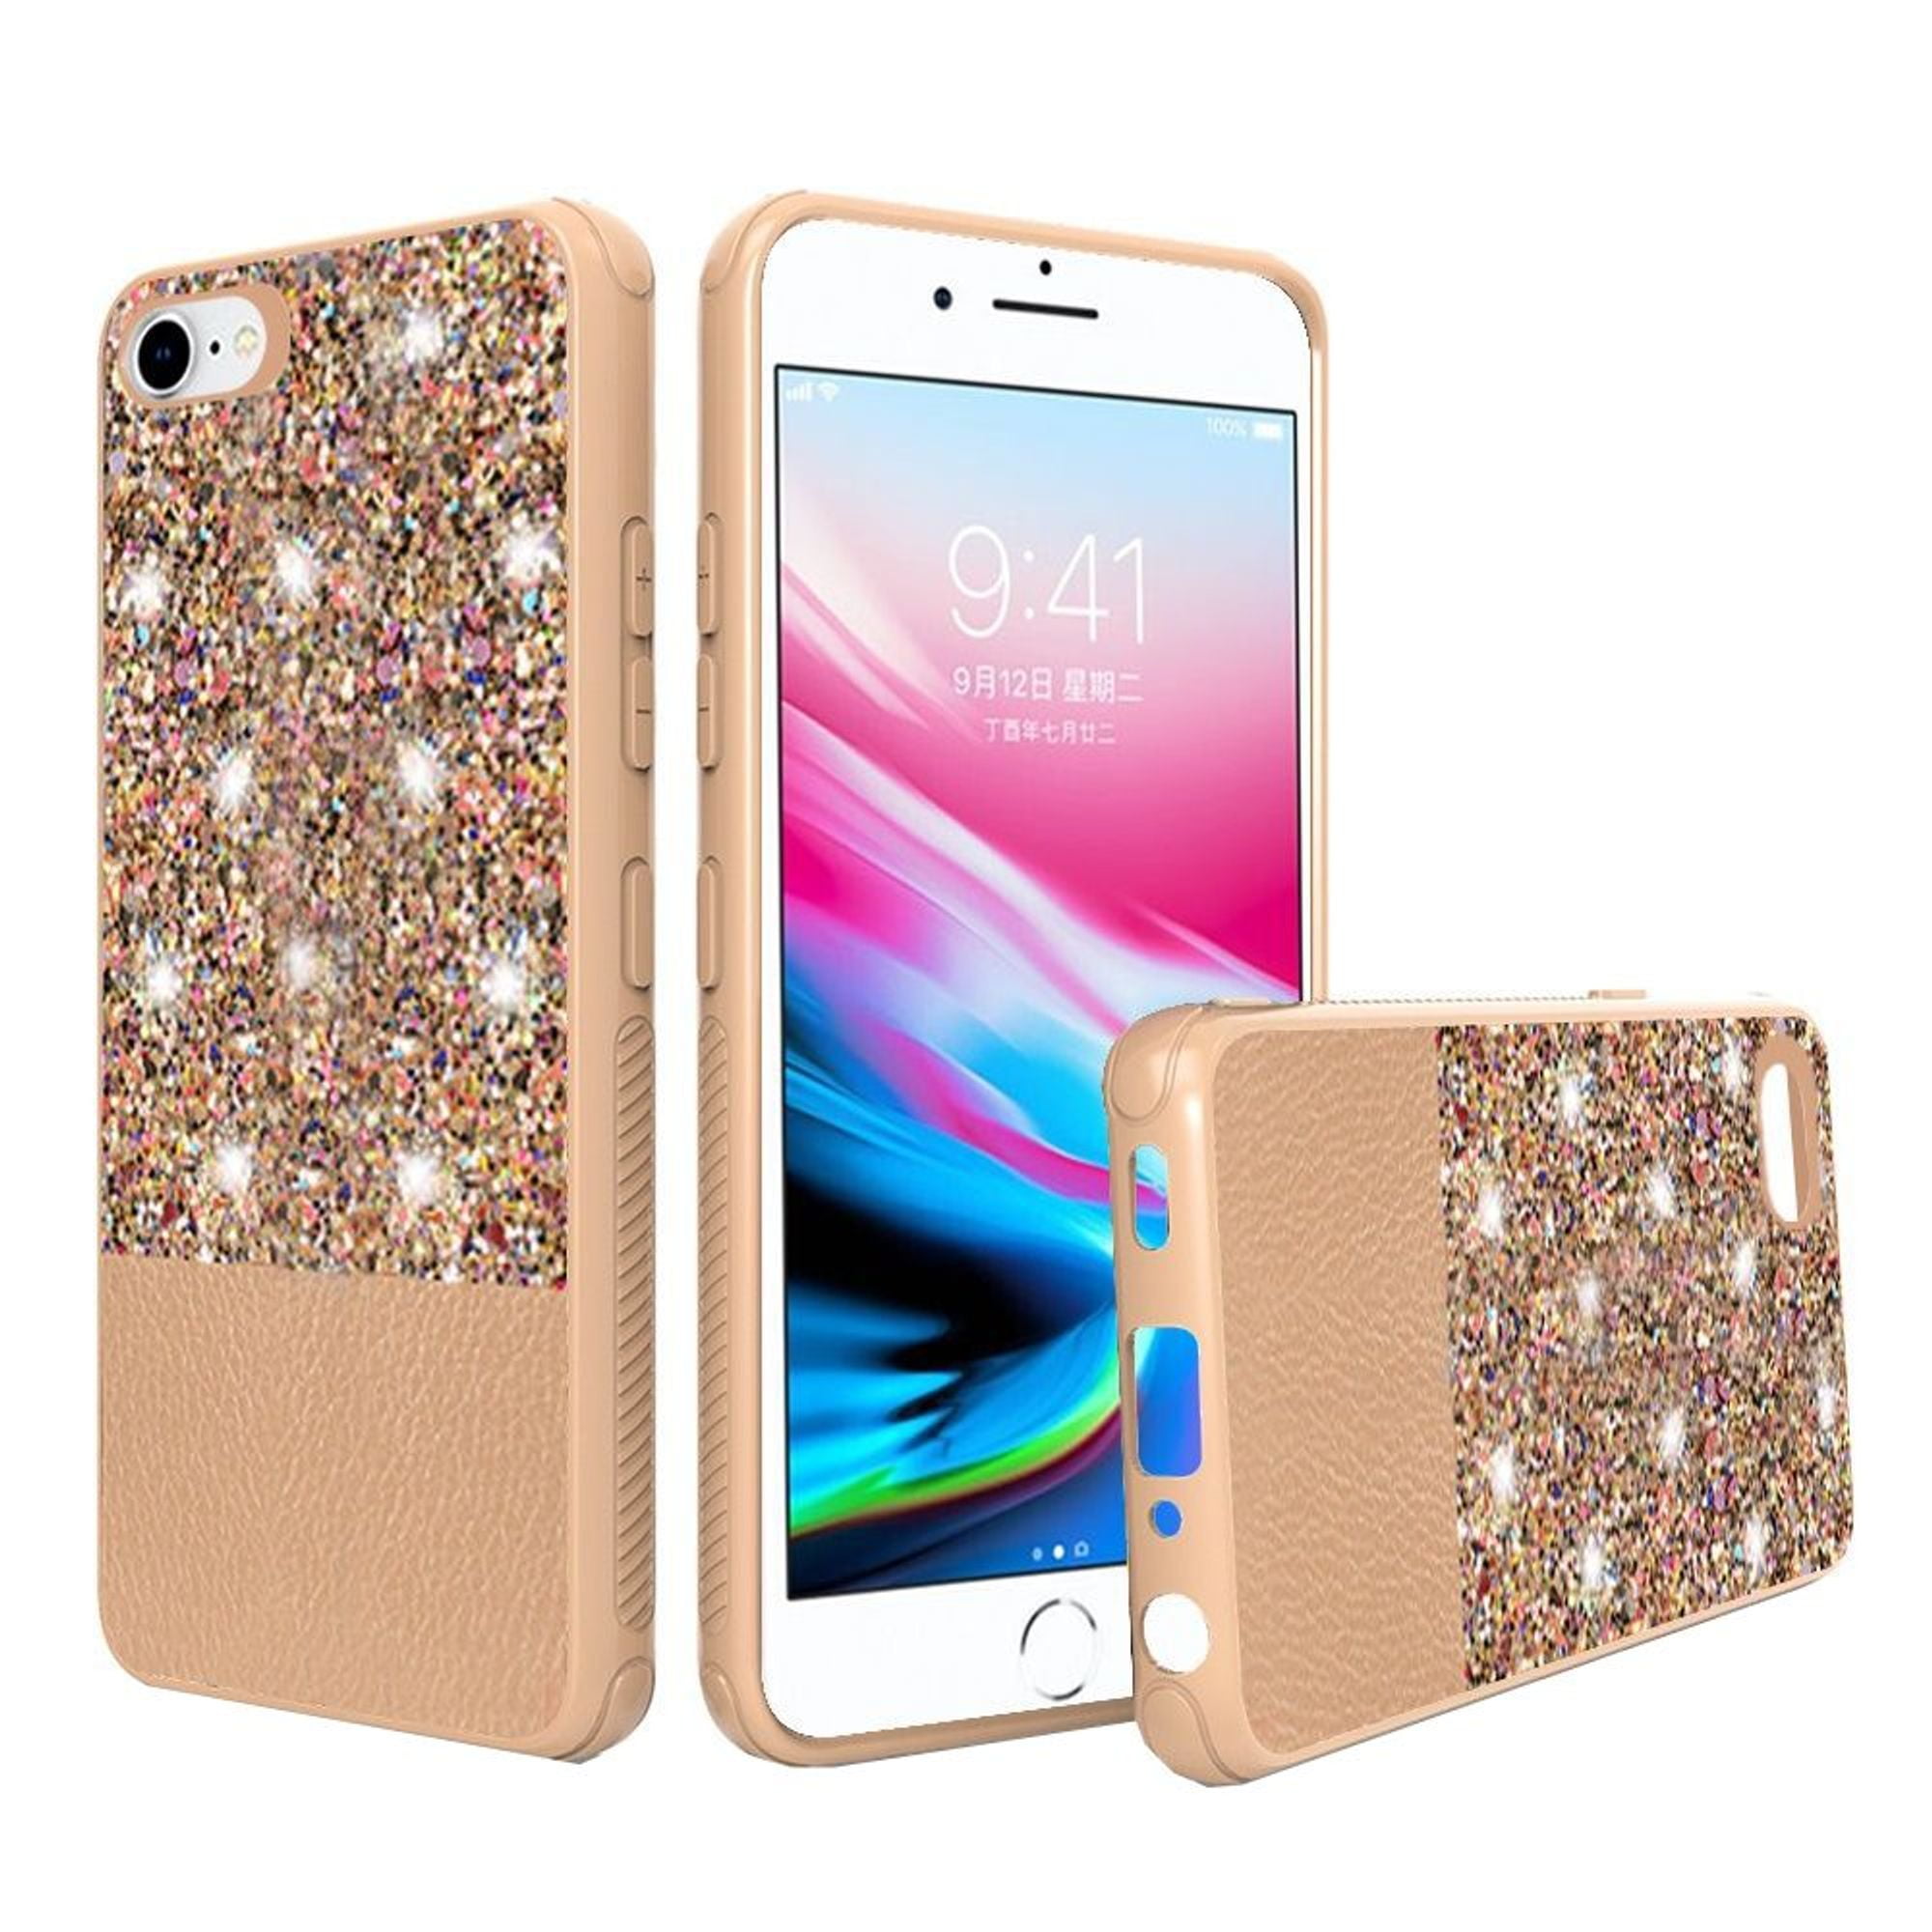 For Apple iPhone 7/8 Case, by Insten PU Leather Glitter Hard Plastic ...